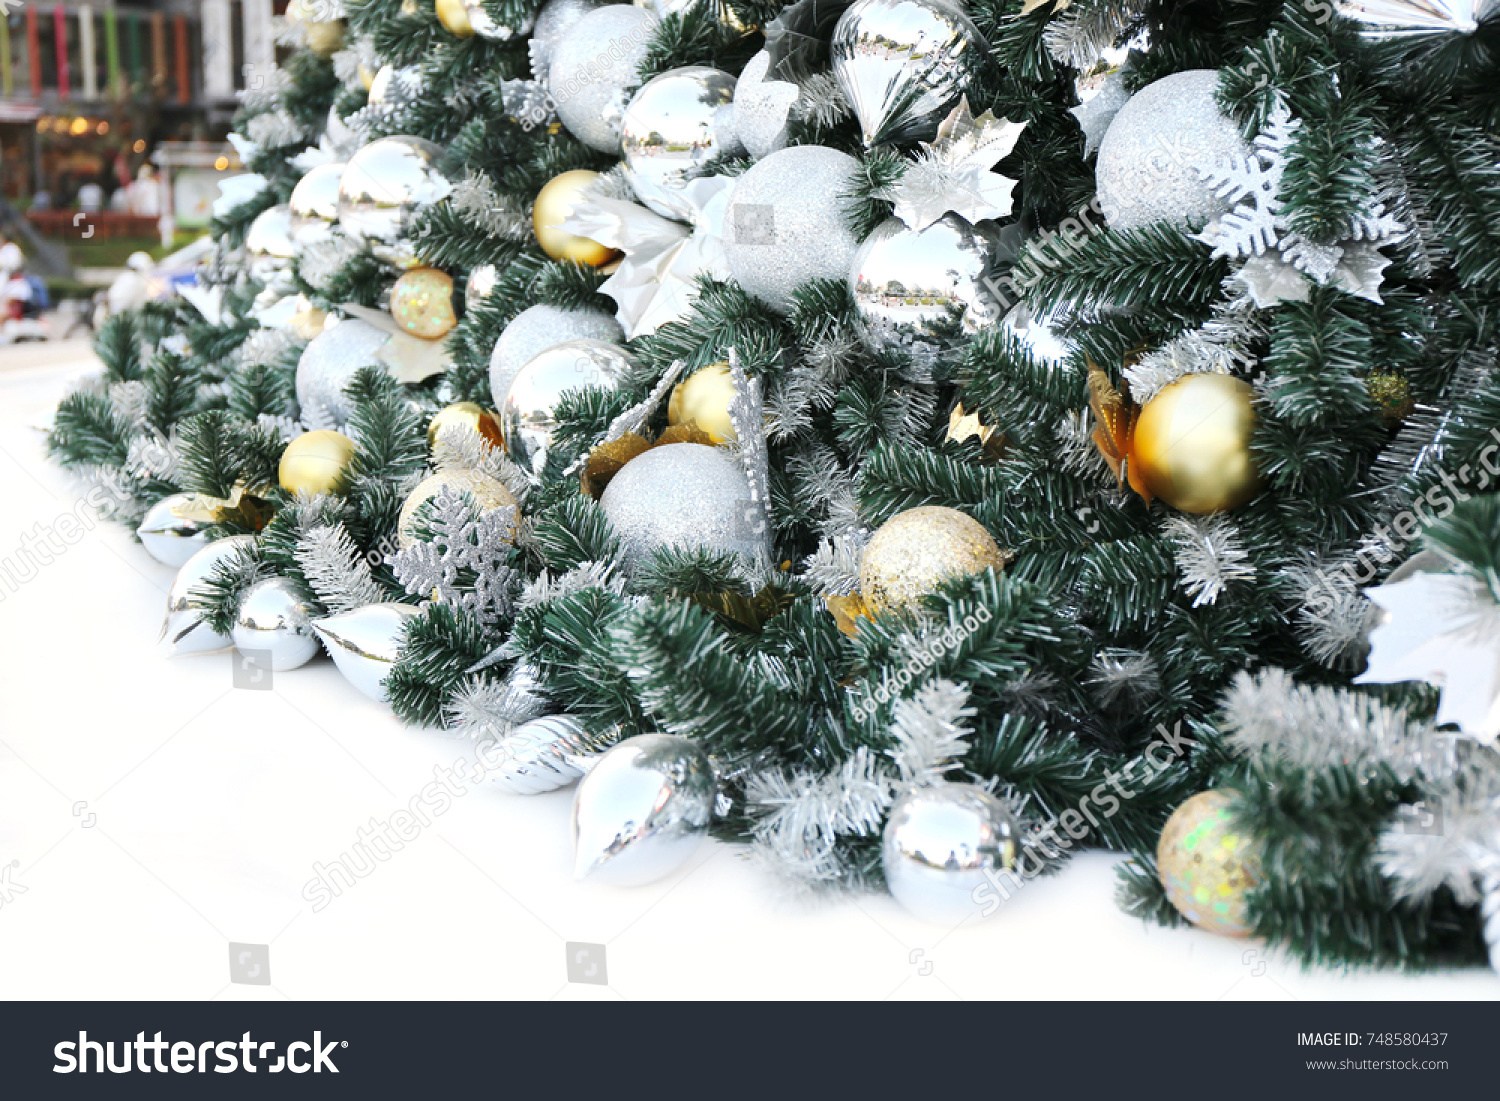 stock photo christmas ball hang on green white pine tree background for new year celebrate party event copy